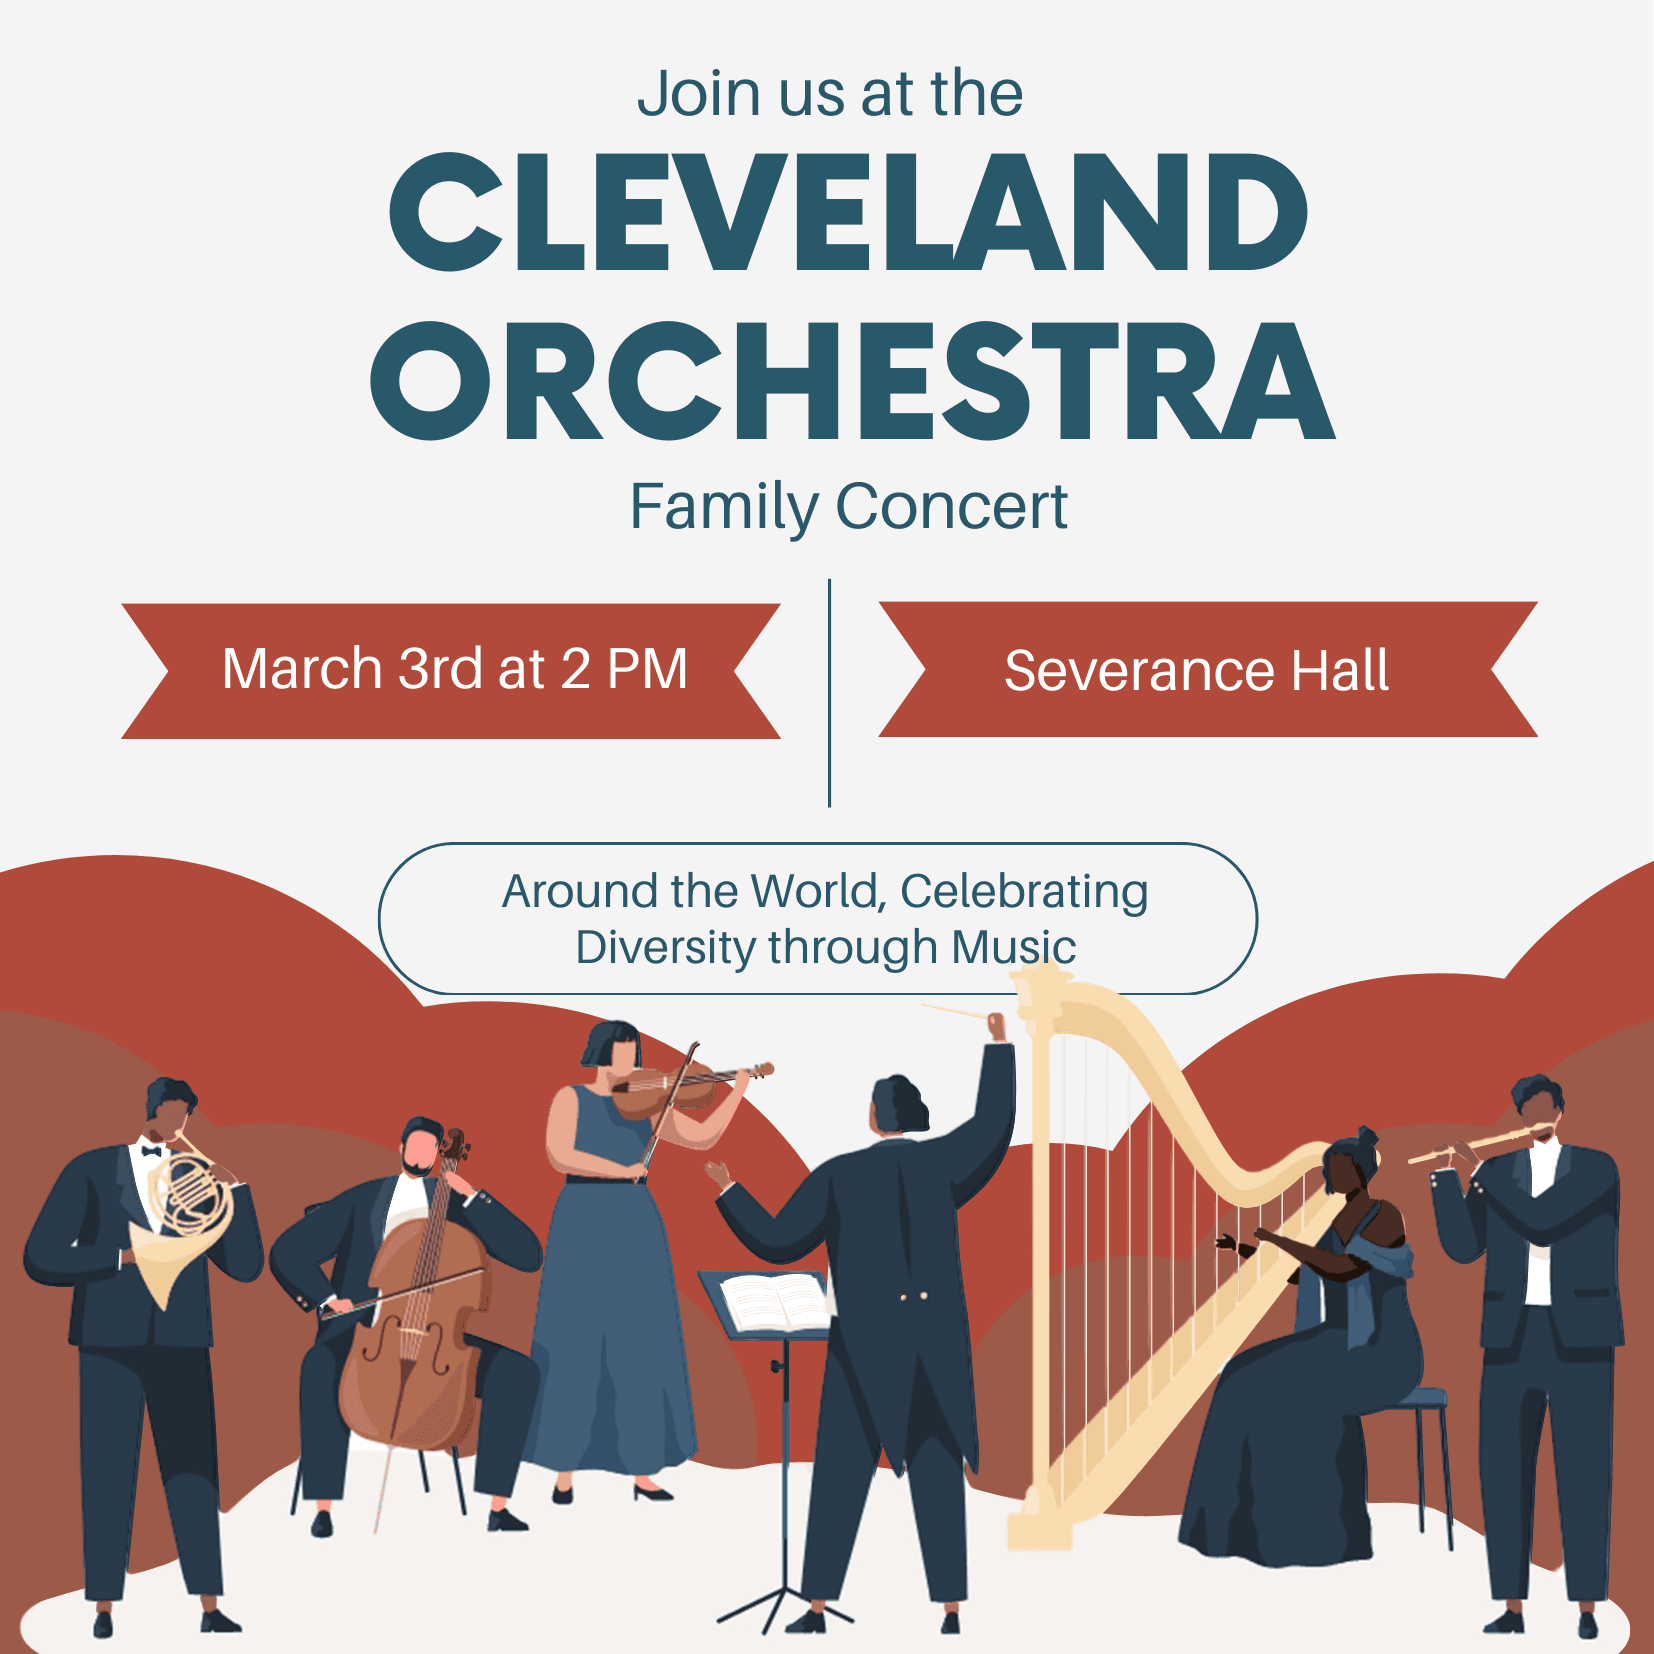 Join us for the Cleveland Orchestra Family Concert